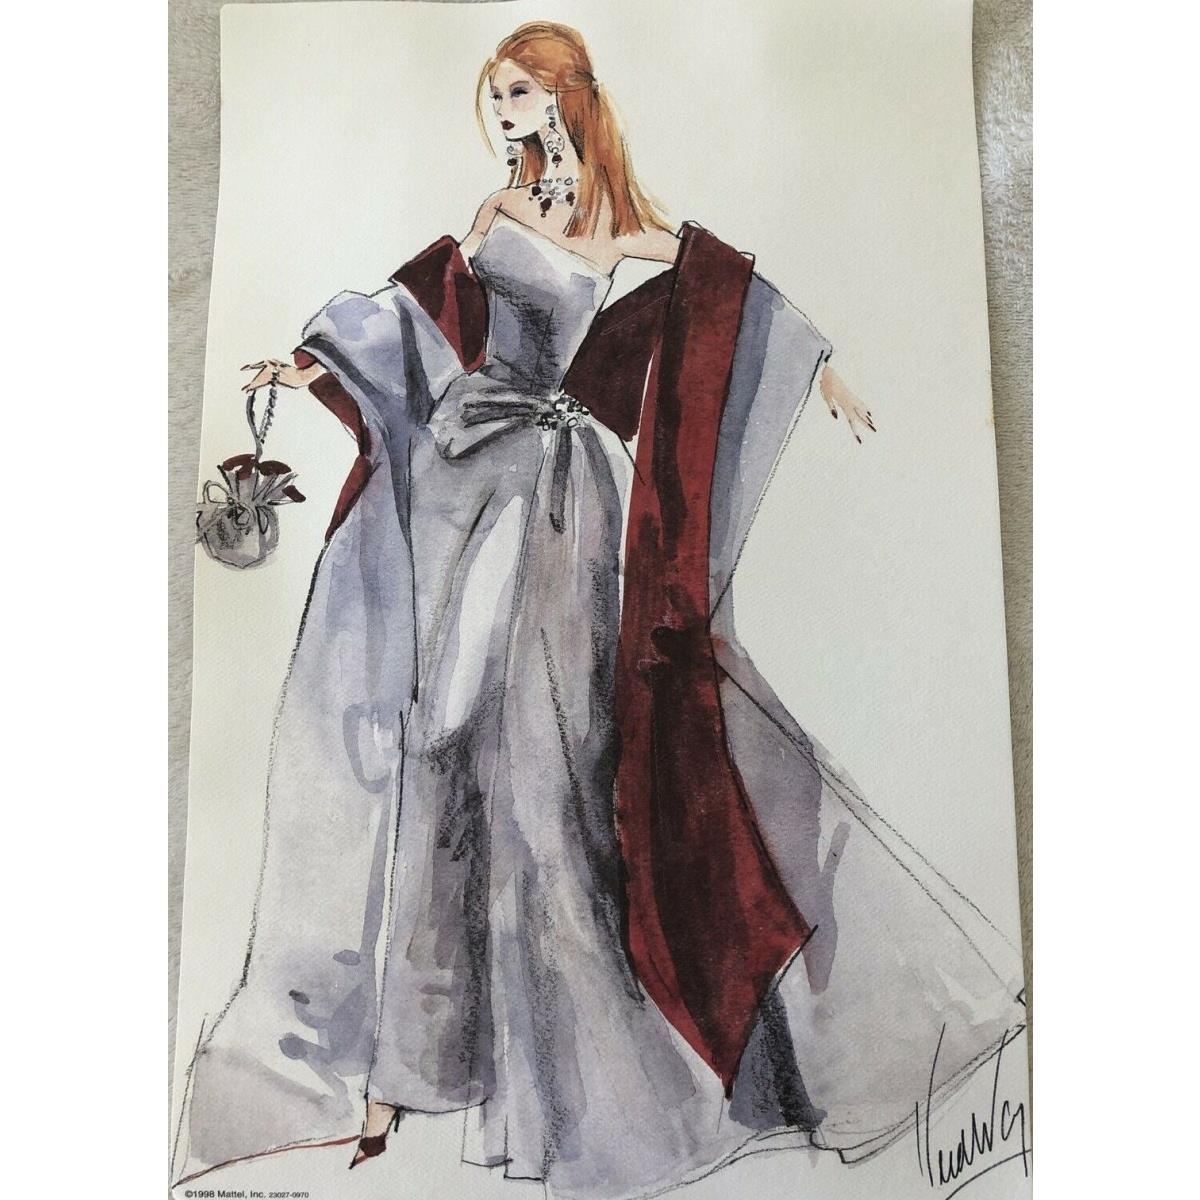 Mattel Designers Salute to Hollywood Collection Vera Wang Barbie Doll Sketch